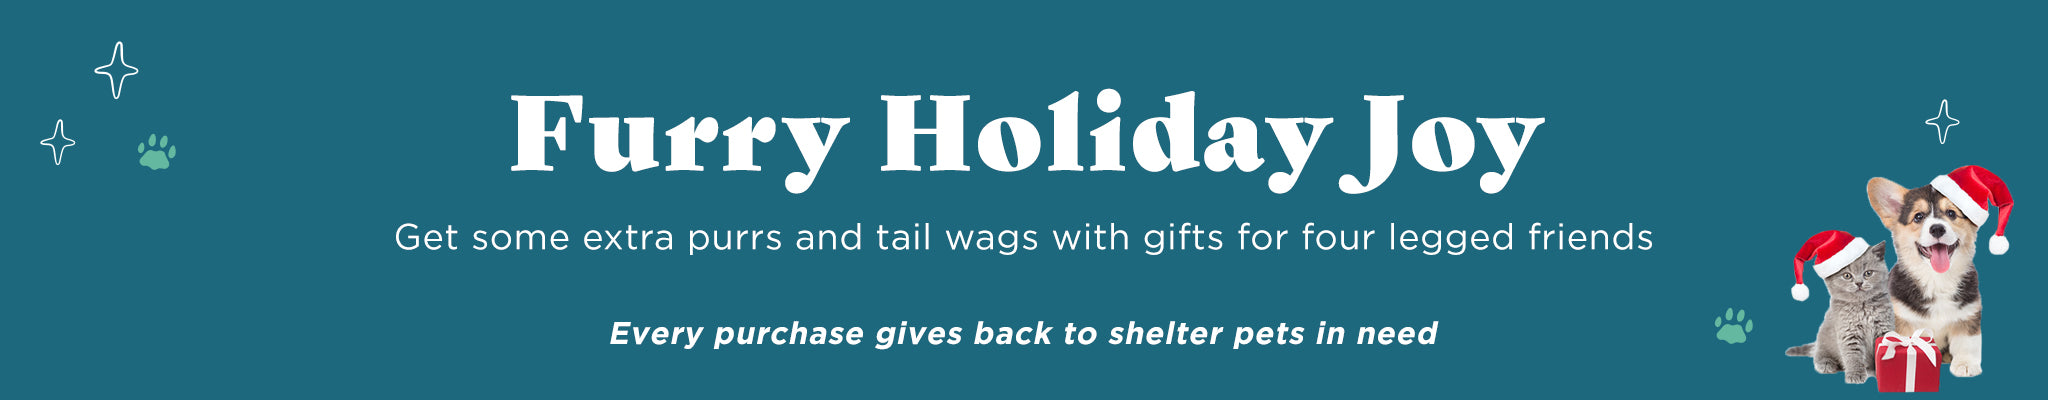 Furry Holiday Joy | Get some extra purrs and tail wags with gifts for four legged friends | Every purchase gives back to shelter pets in need